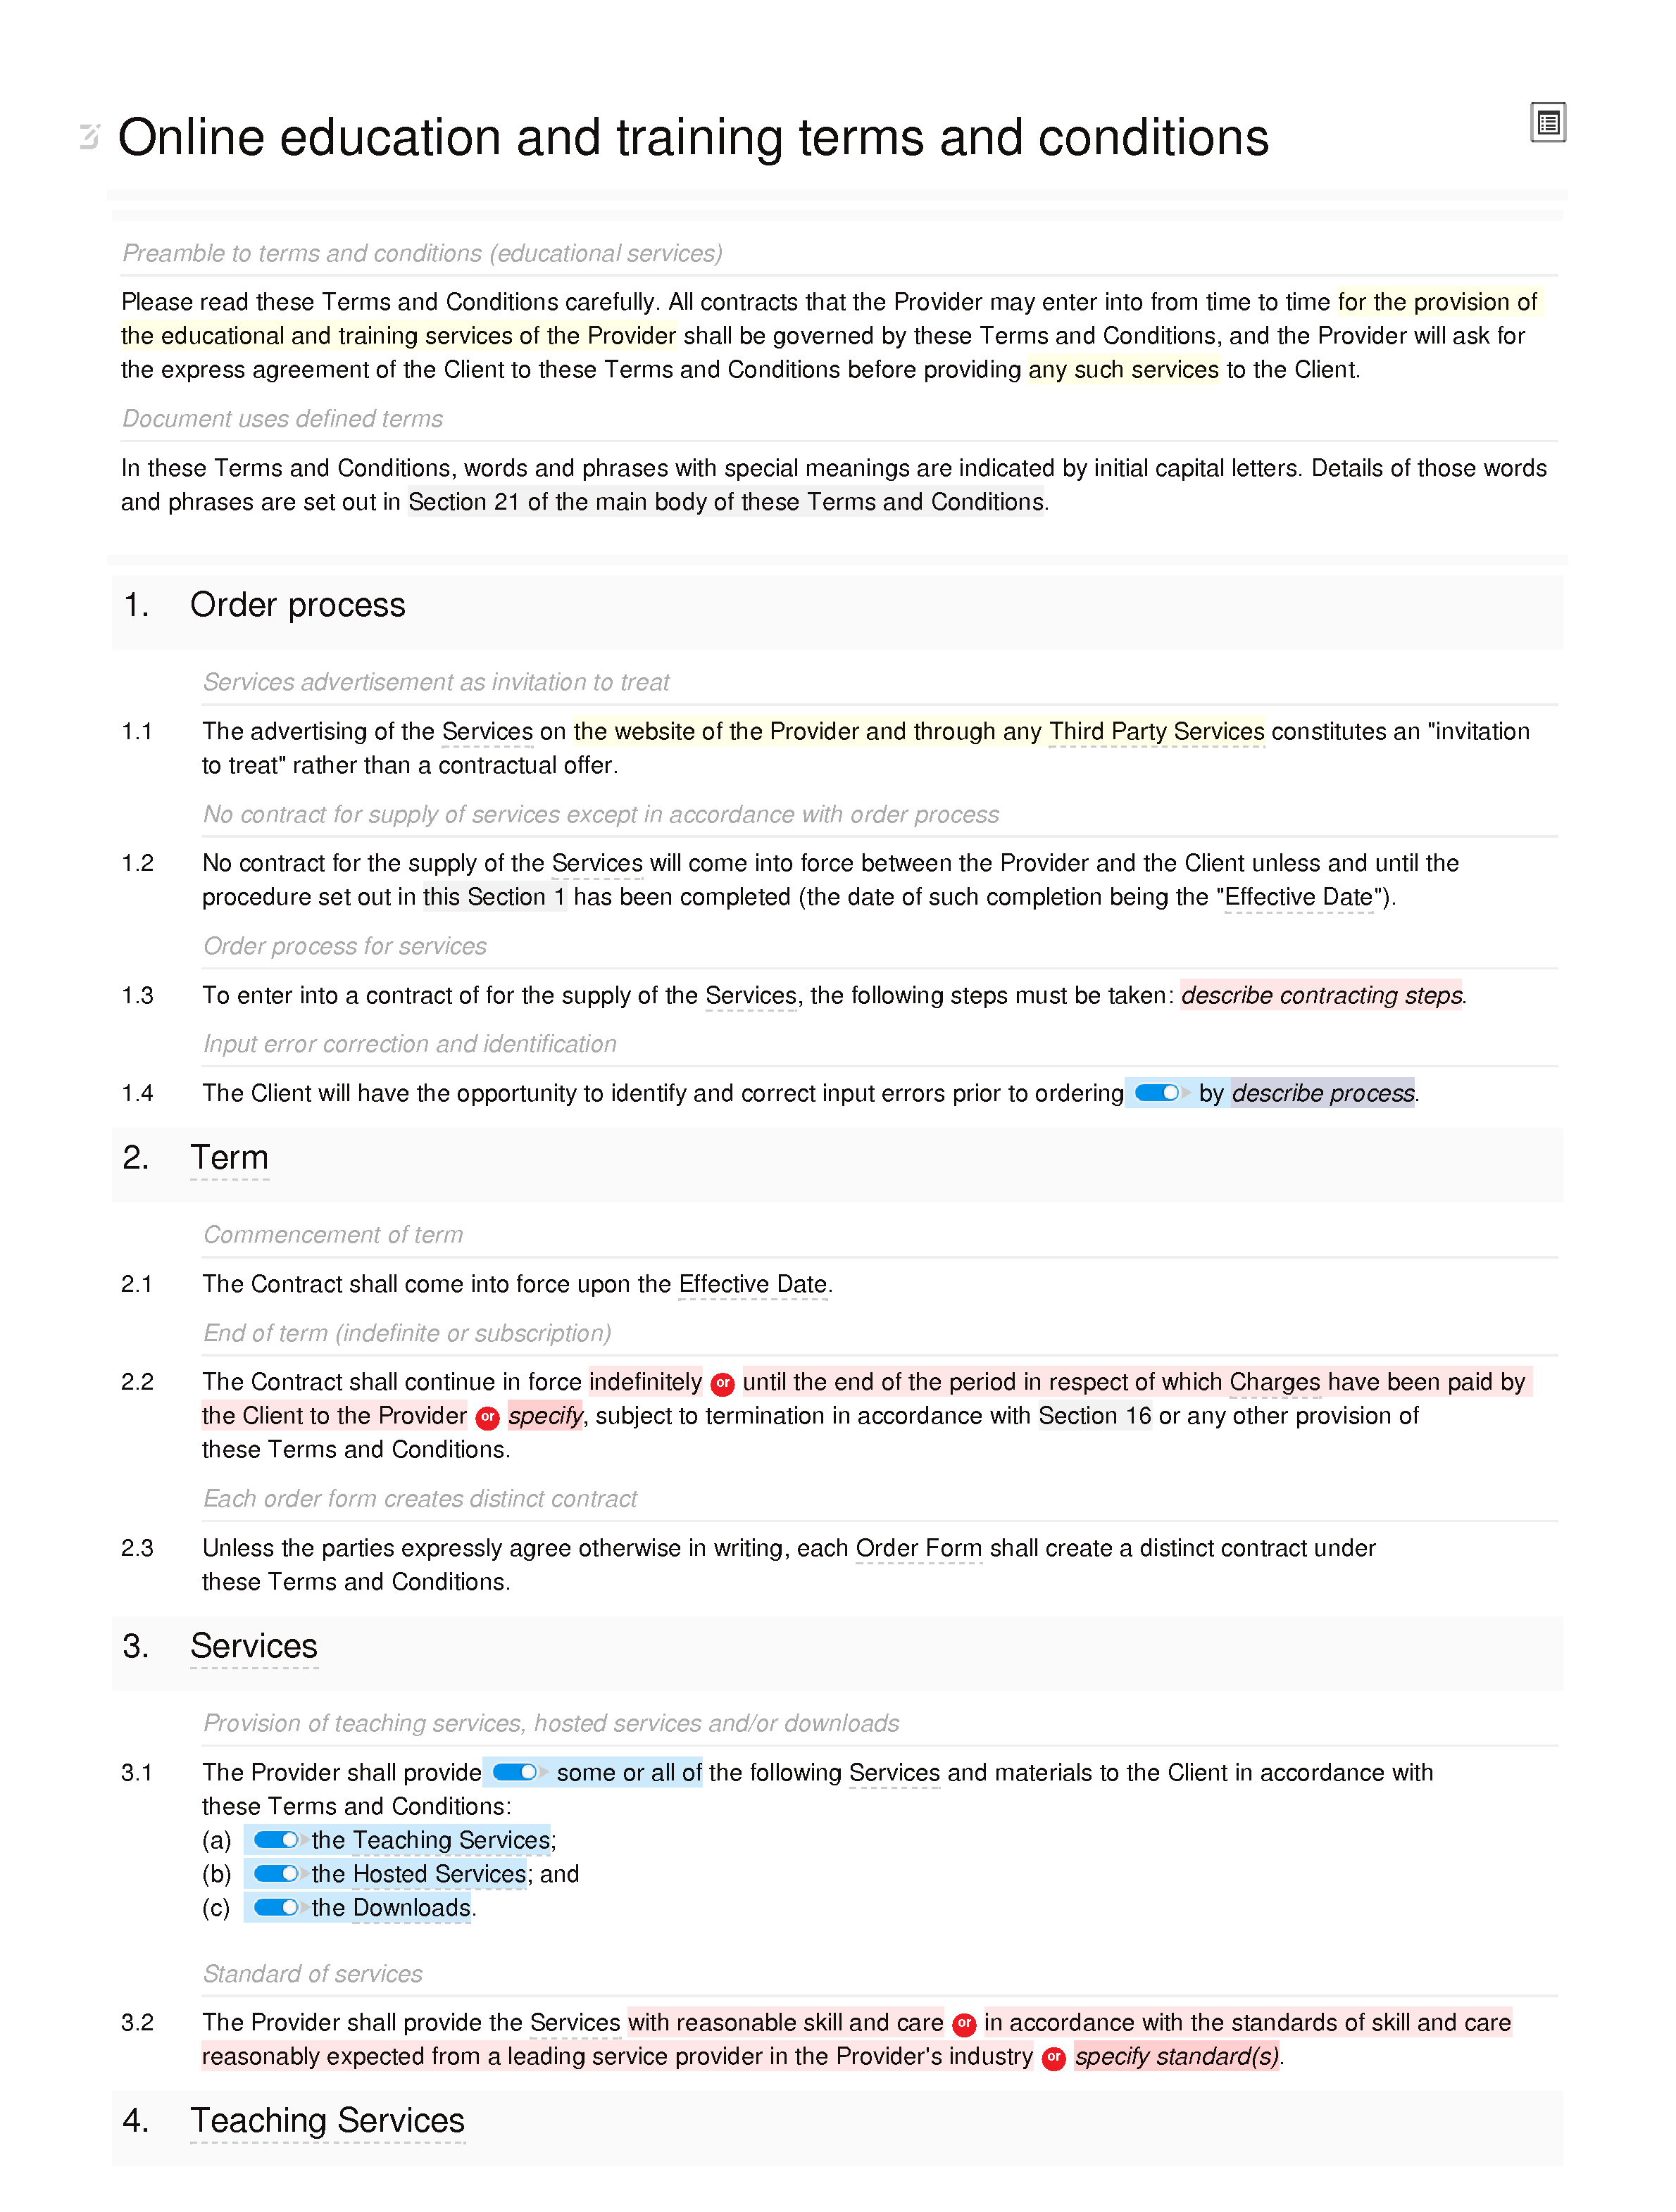 Online education and training terms and conditions (B2C) document editor preview